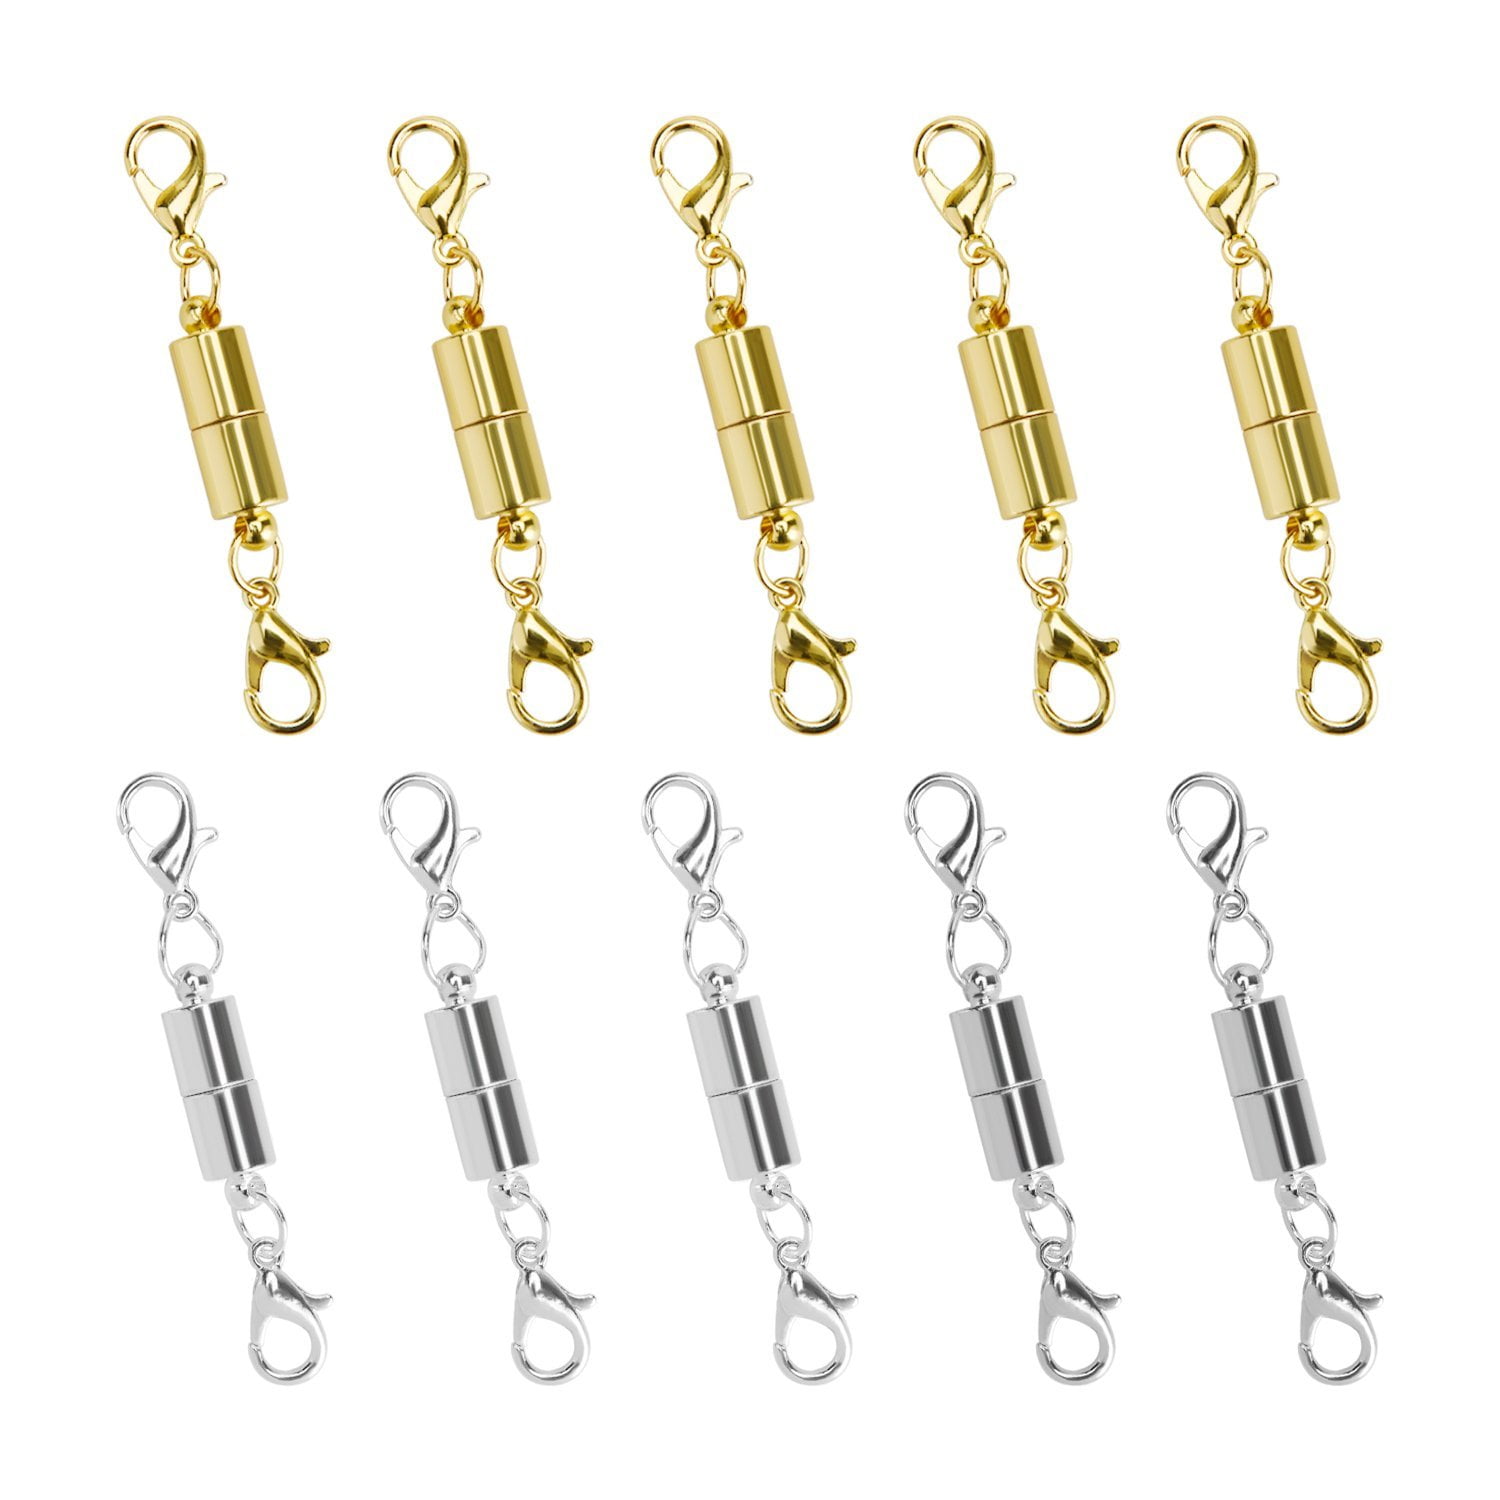 Gold Color 8 CleverDelights Magnetic Jewelry Clasps Lobster Clasp Clasp Converter Capsule Style 